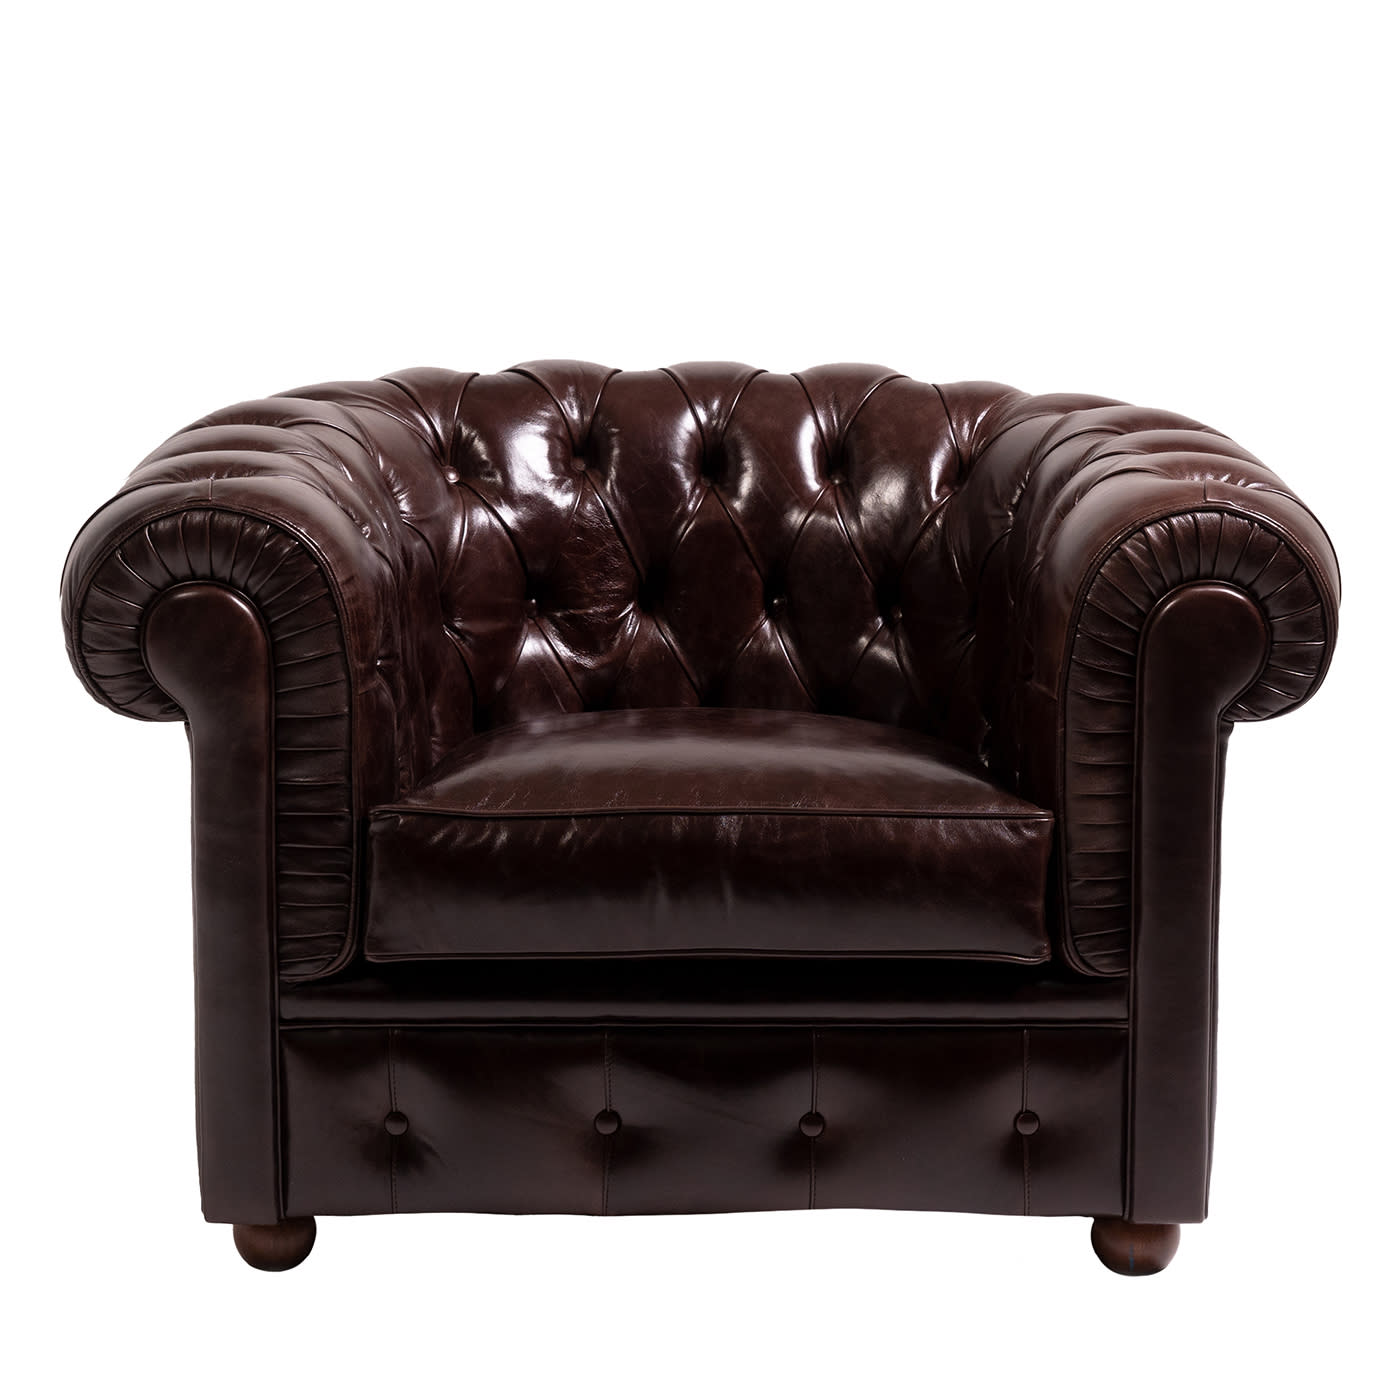 Chesterfield Brown Leather Armchair - Mantellassi 1926